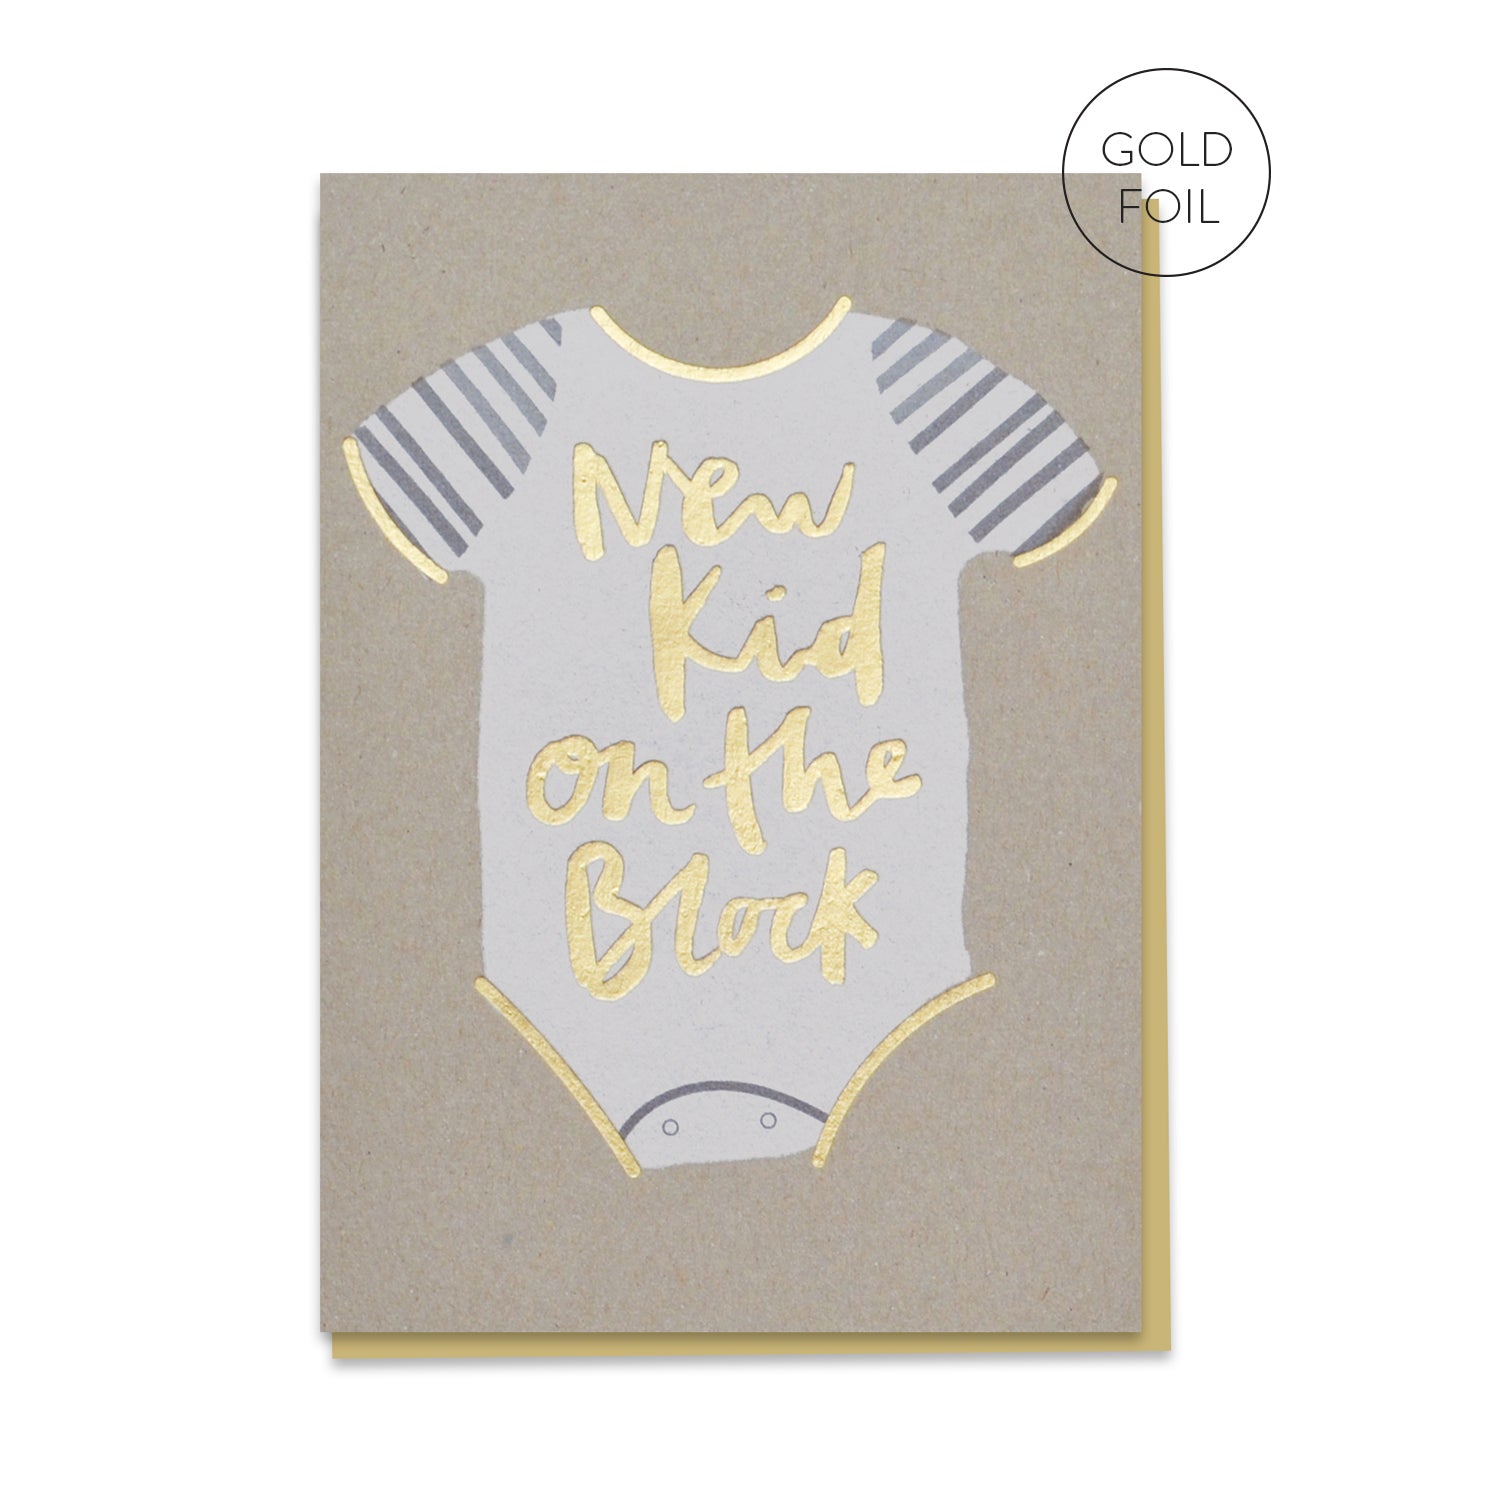 New Kid On The Block Card